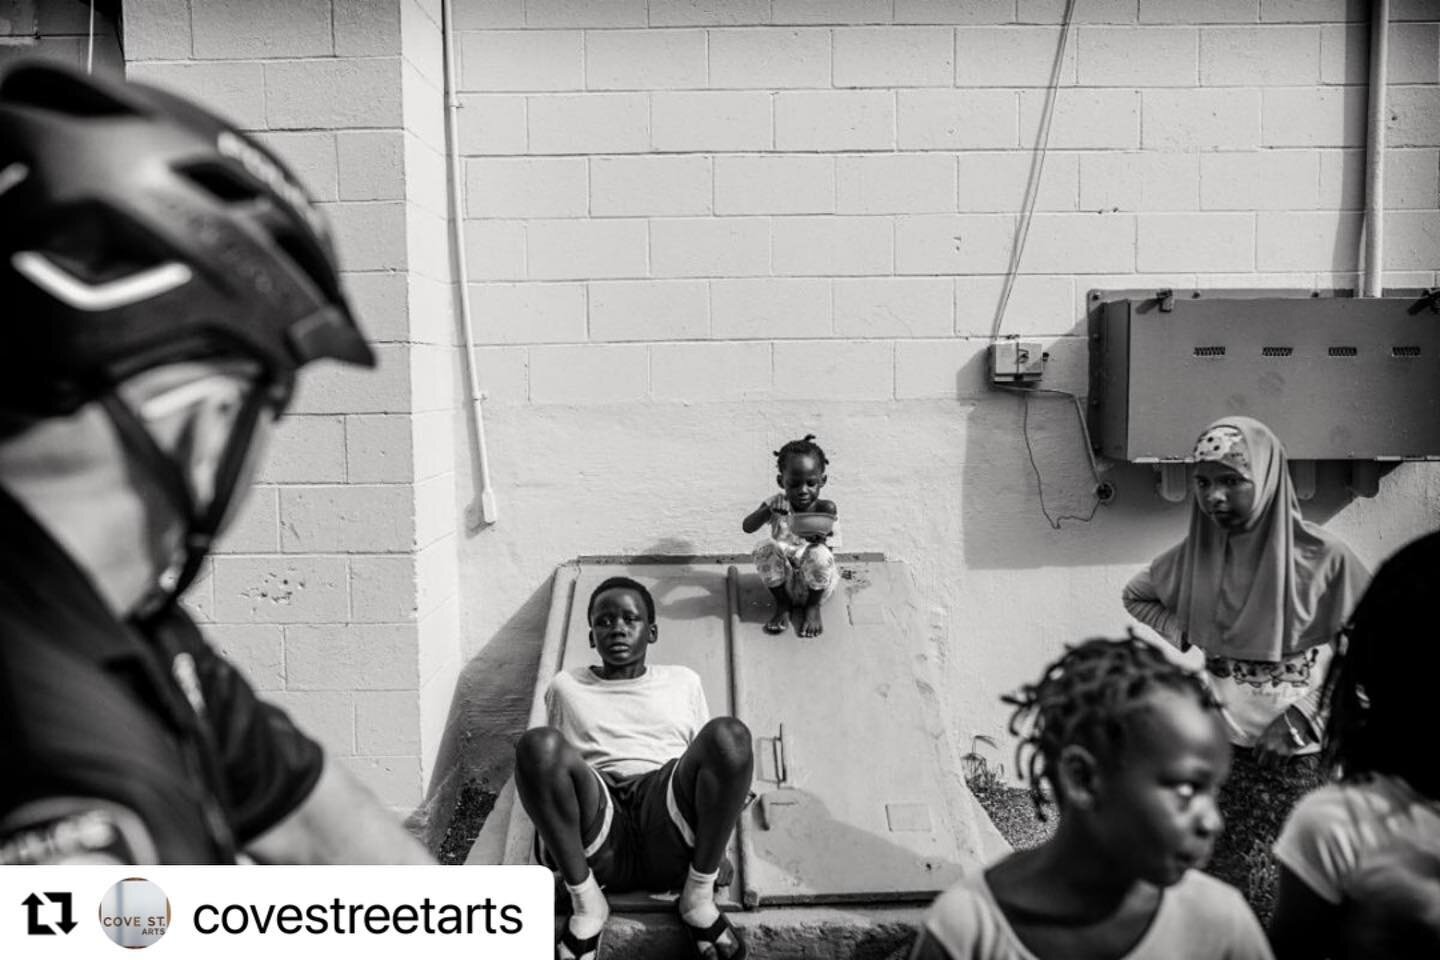 Get on over to Cove Street Arts and check out this incredible exhibition by my other half @seanalonzoharris #Repost @covestreetarts with @make_repost
・・・
NOW OPEN: Sean Alonzo Harris, &quot;The Space Between,&quot; curated by Bruce Brown. The exhibit